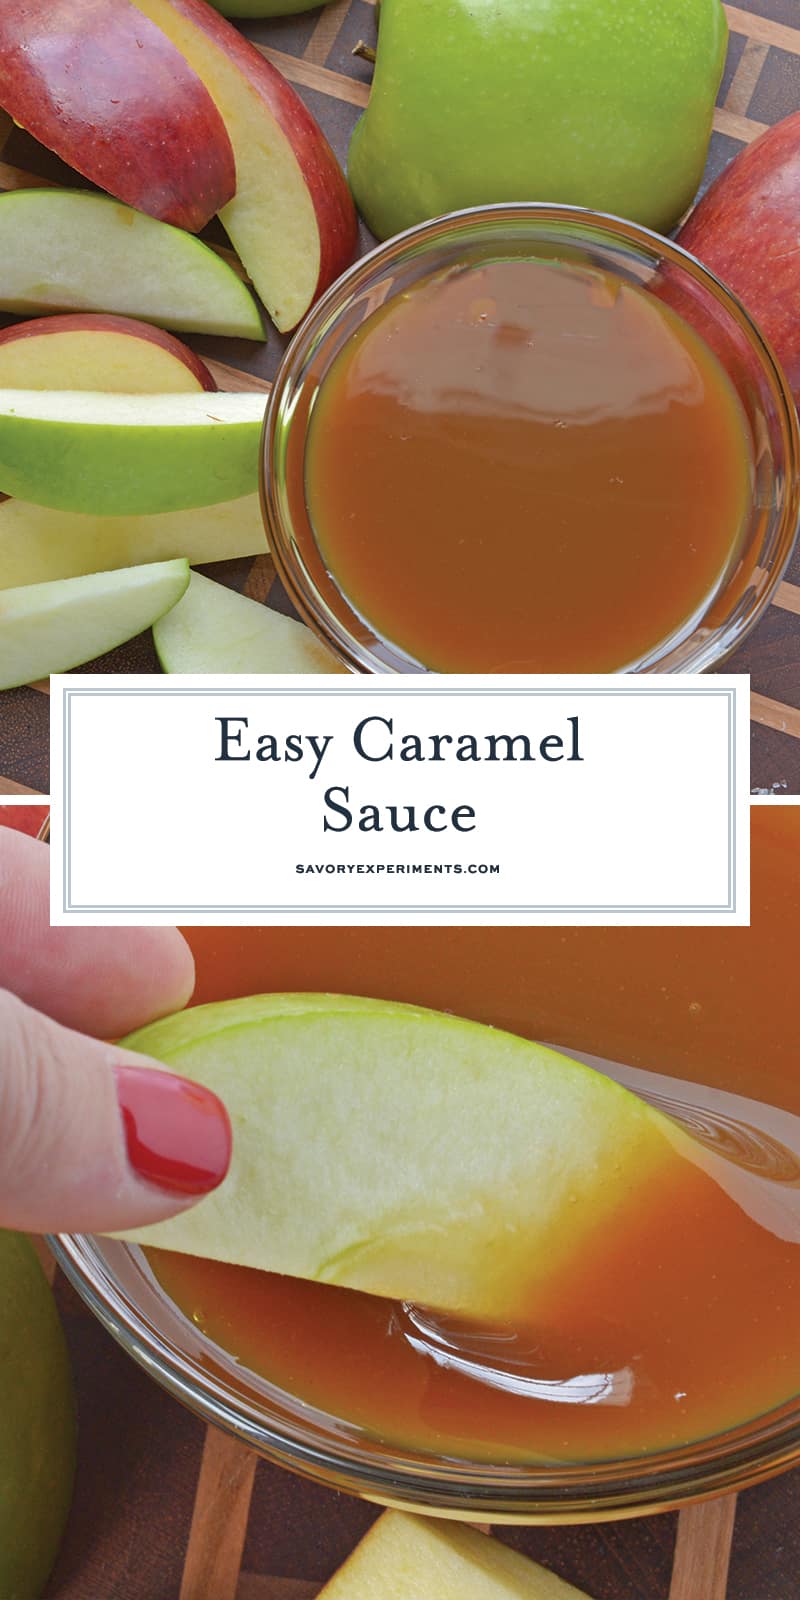 Easy Caramel Sauce comes together in just 15 minutes with only 5 ingredients. Use it in any recipe that calls for caramel! #howtomakecaramel #caramelsauce www.savoryexperiments.com 